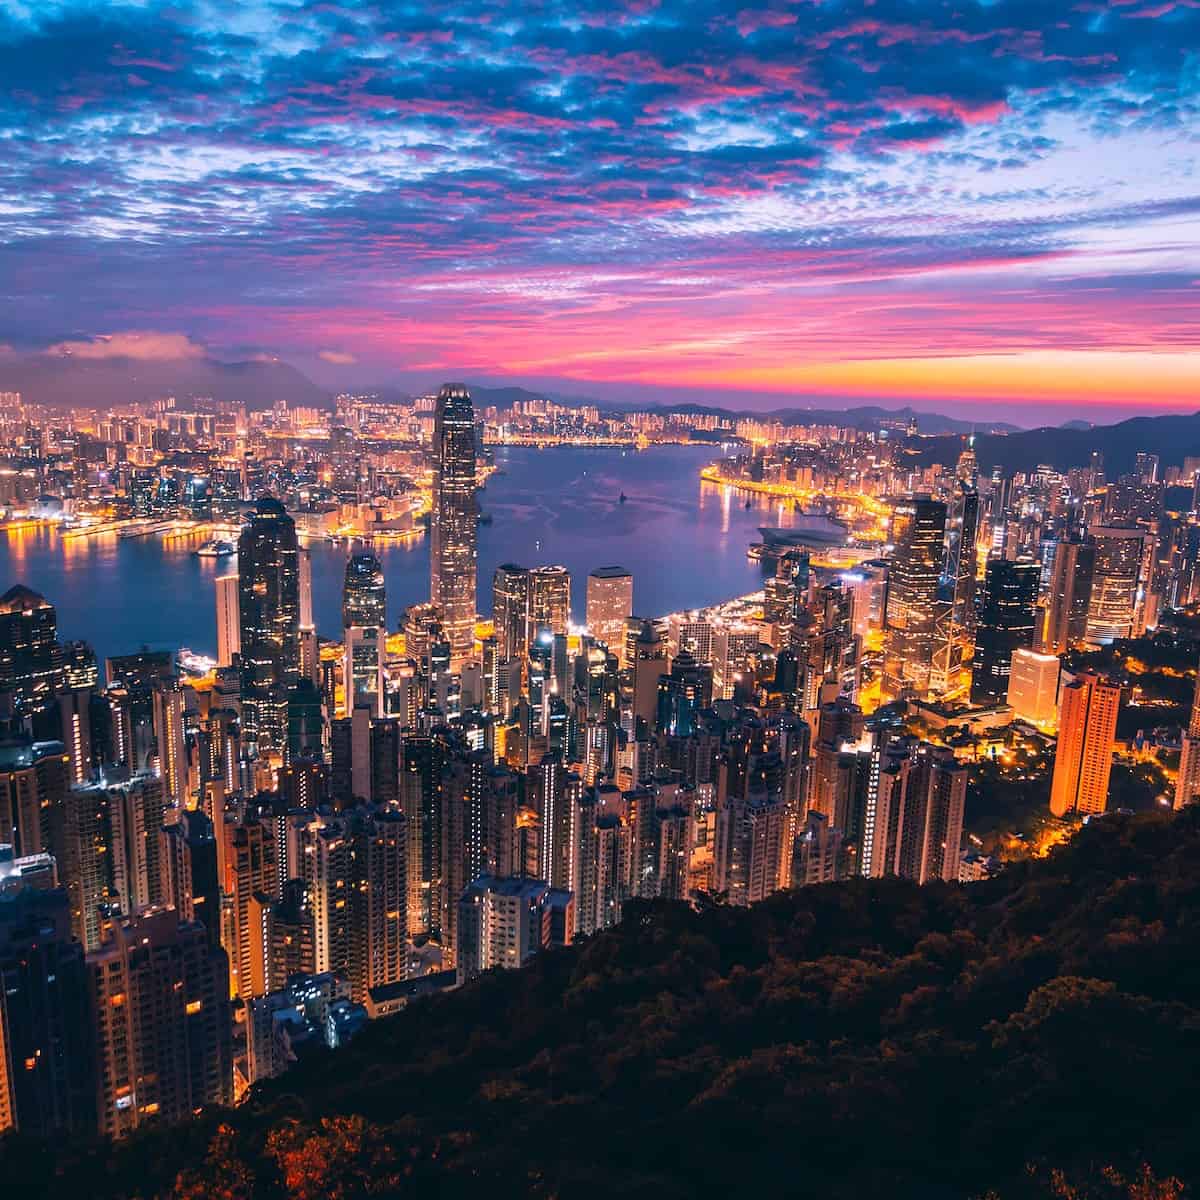 Hong Kong's Coinbase Invitation May Look Enticing But It's Not- Here's Why